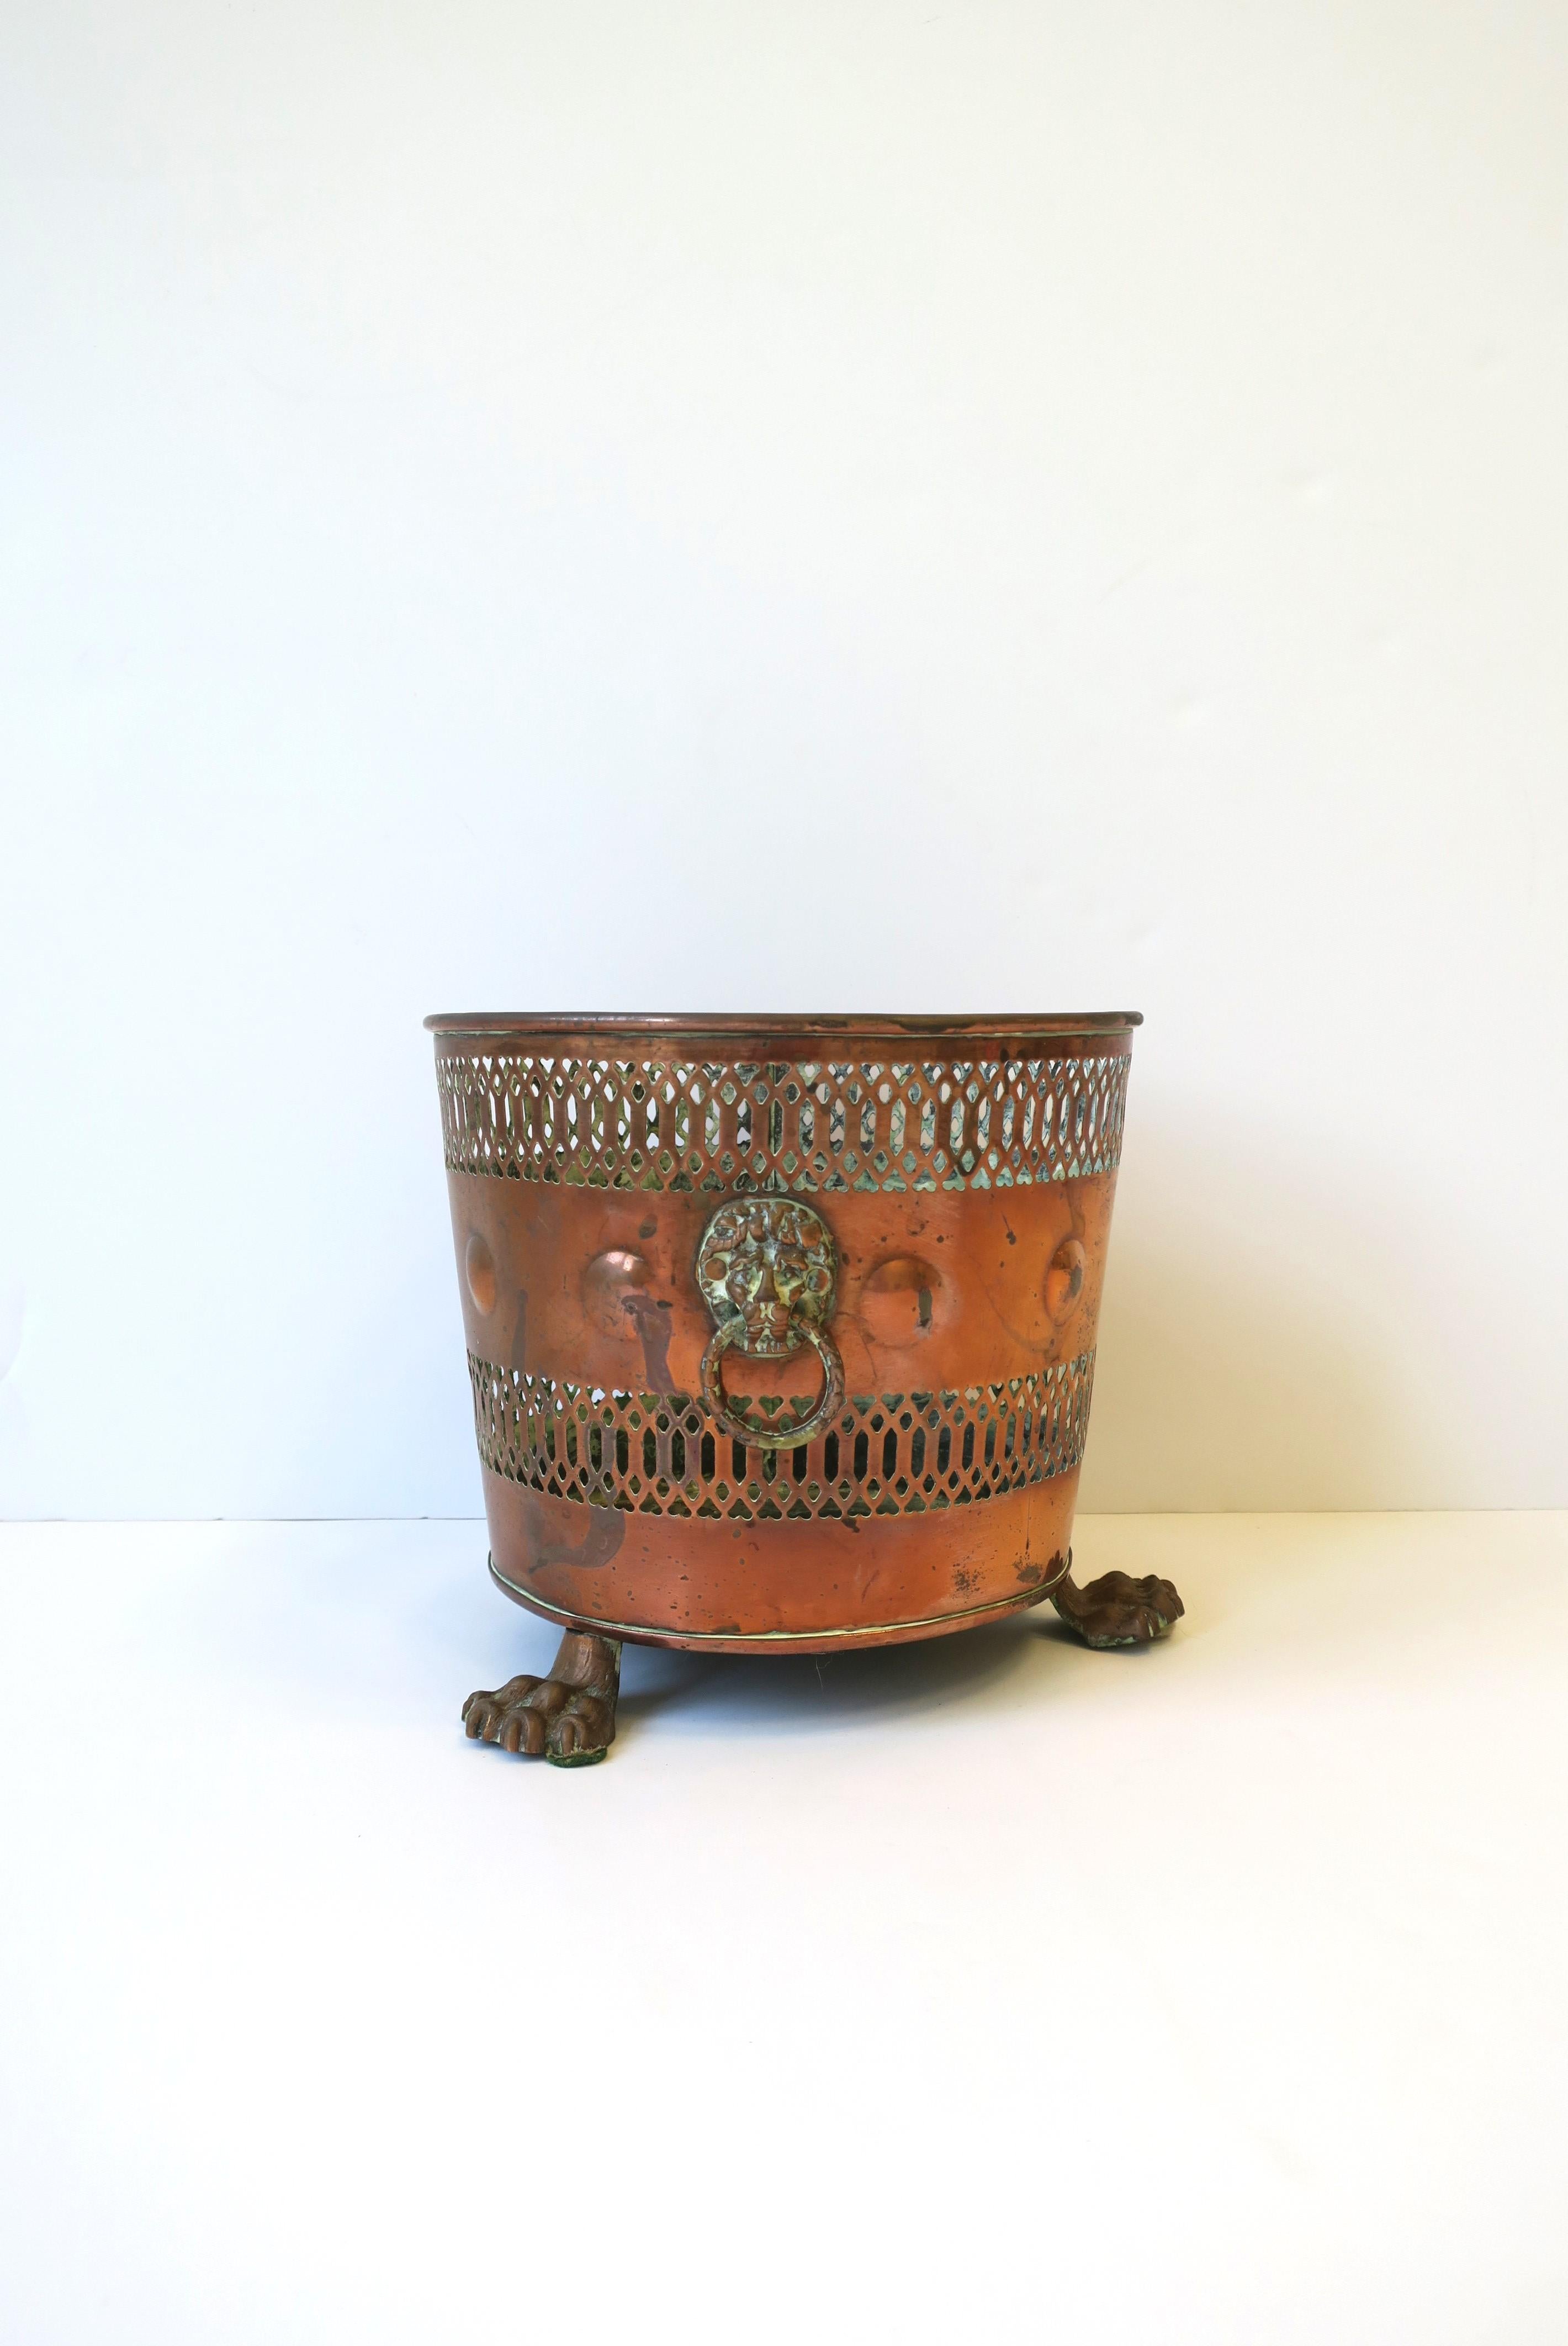 An English copper plant or flower pot holder cachepot jardiniere w/Lion paw feet, circa early 20th century, England. Dimensions: 8